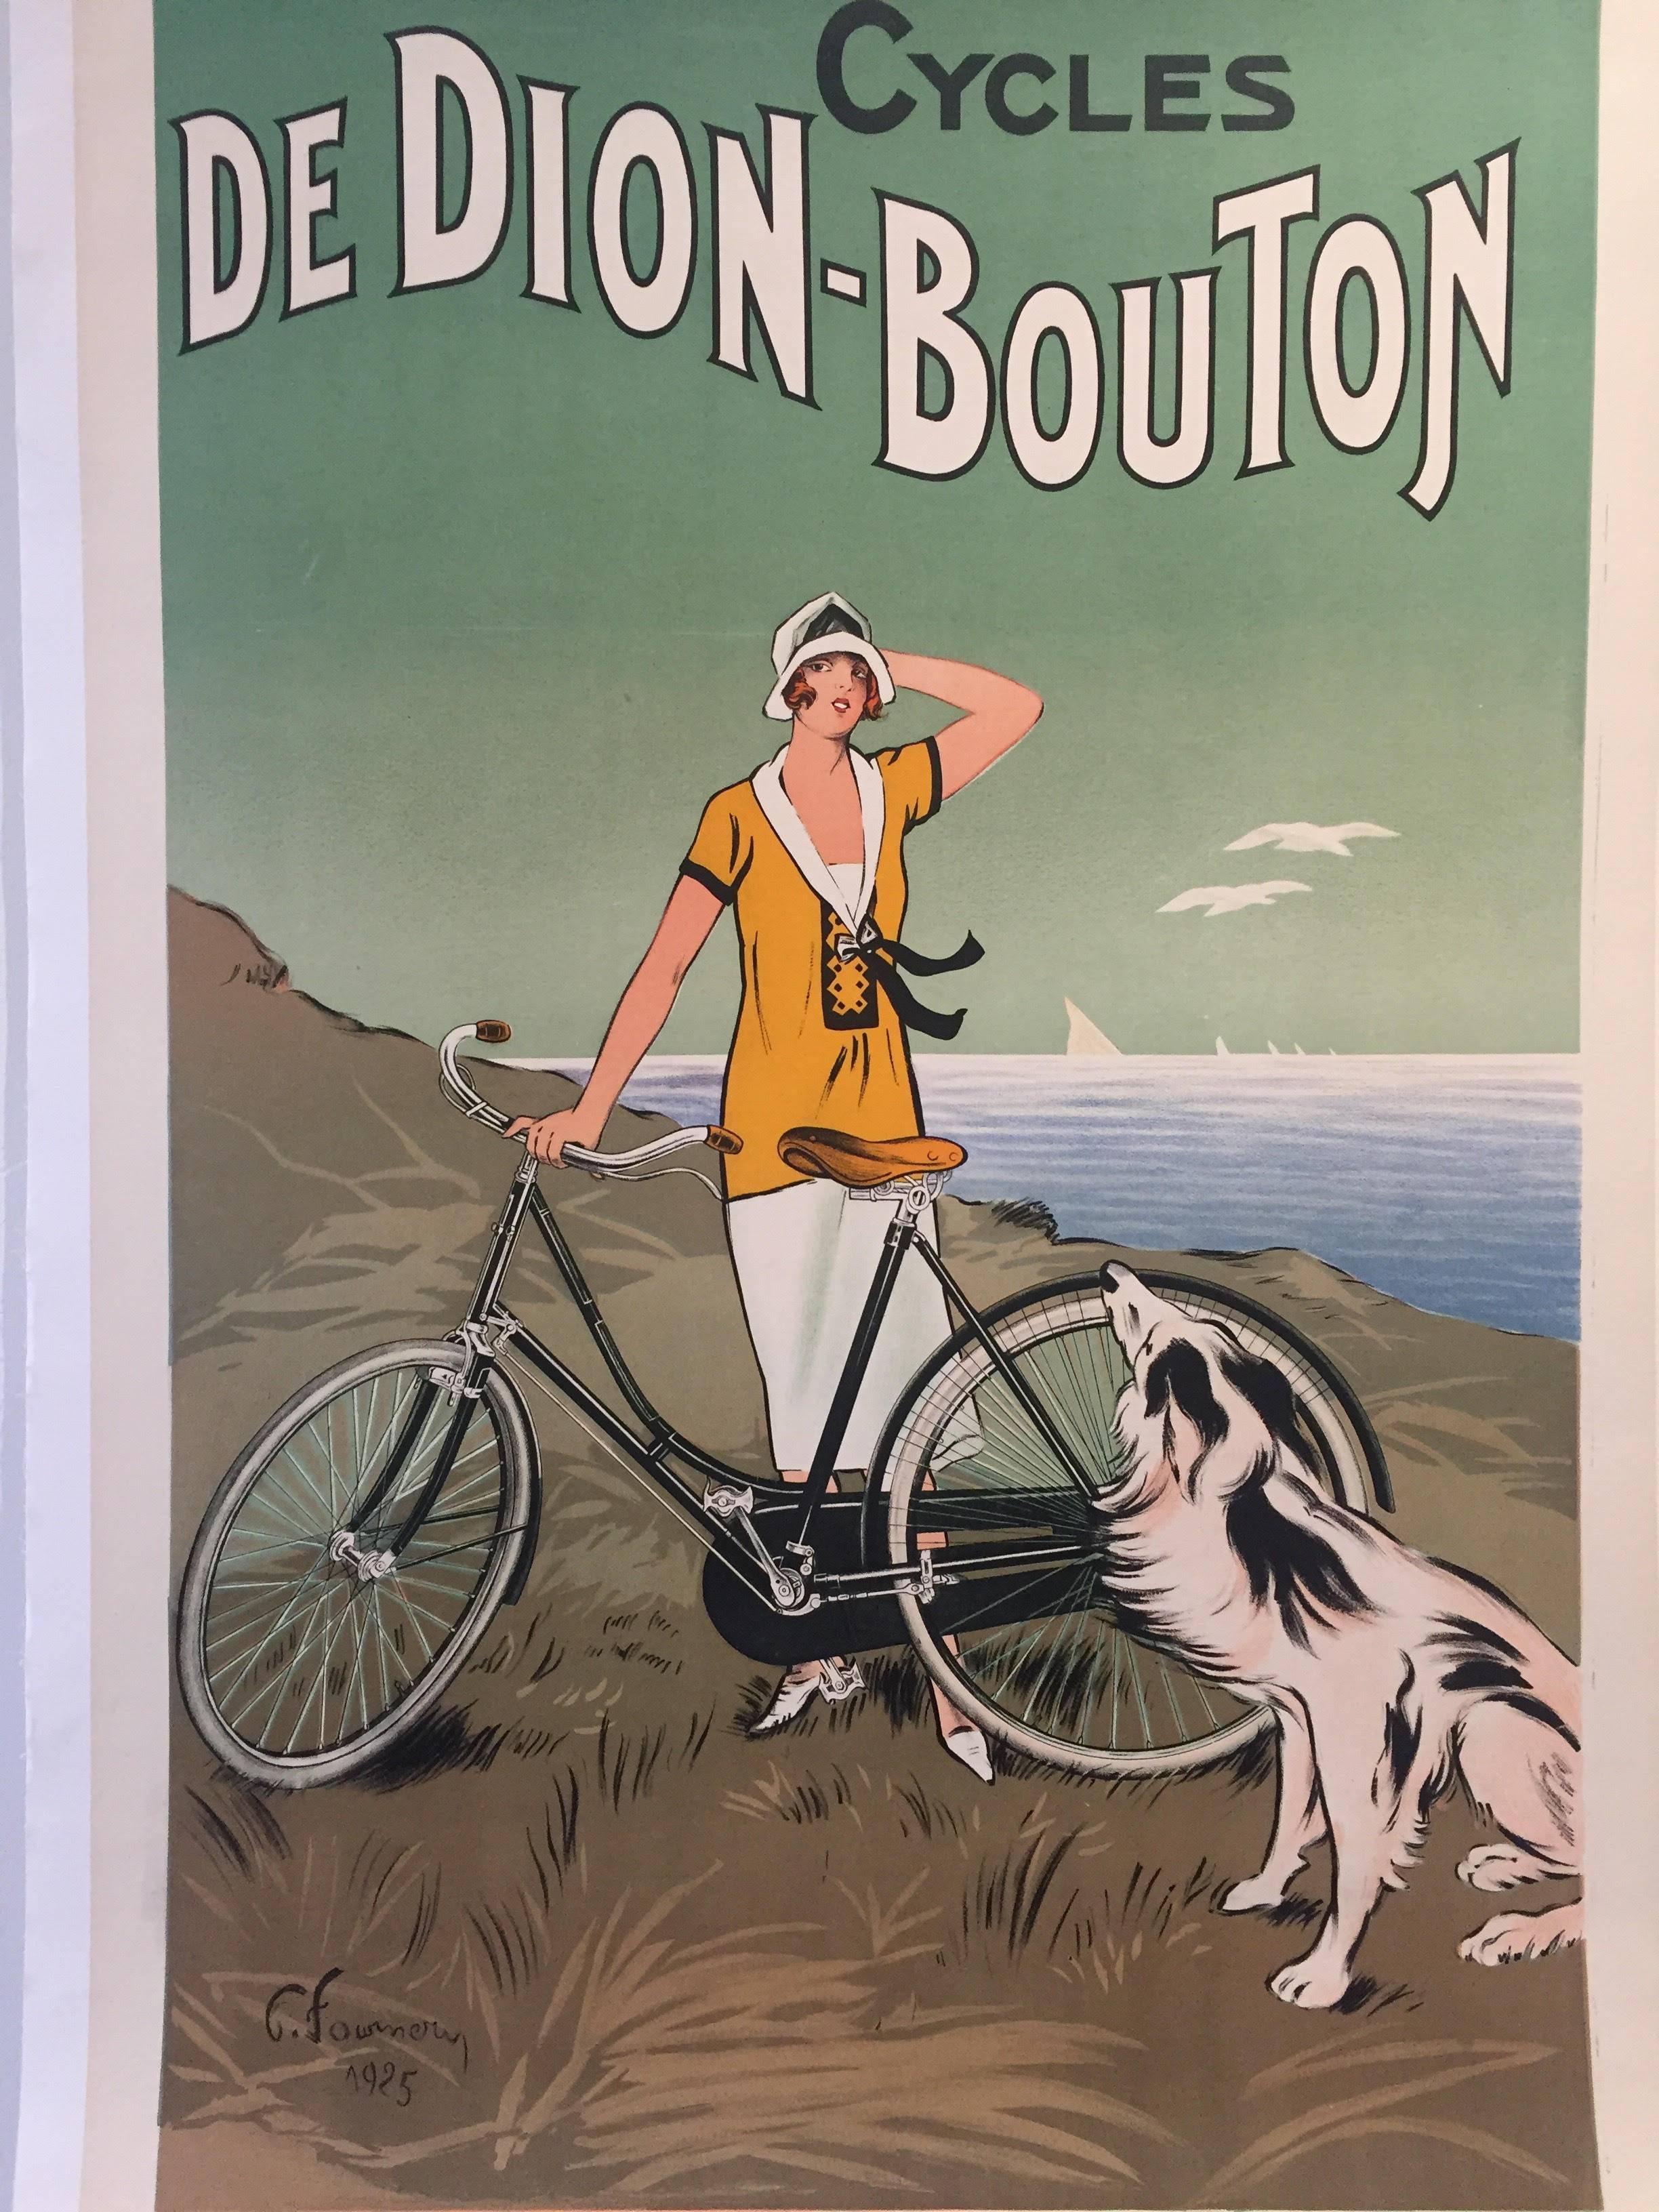 So distinctively 1920s, for French automobile manufacturer and railcar manufacturer operating from 1883-1932.


Artist: 
Fourney

Year: 
1925

Dimensions: 
119 x 81 cm

Condition: 
Excellent condition

Format: 
Linen backed.